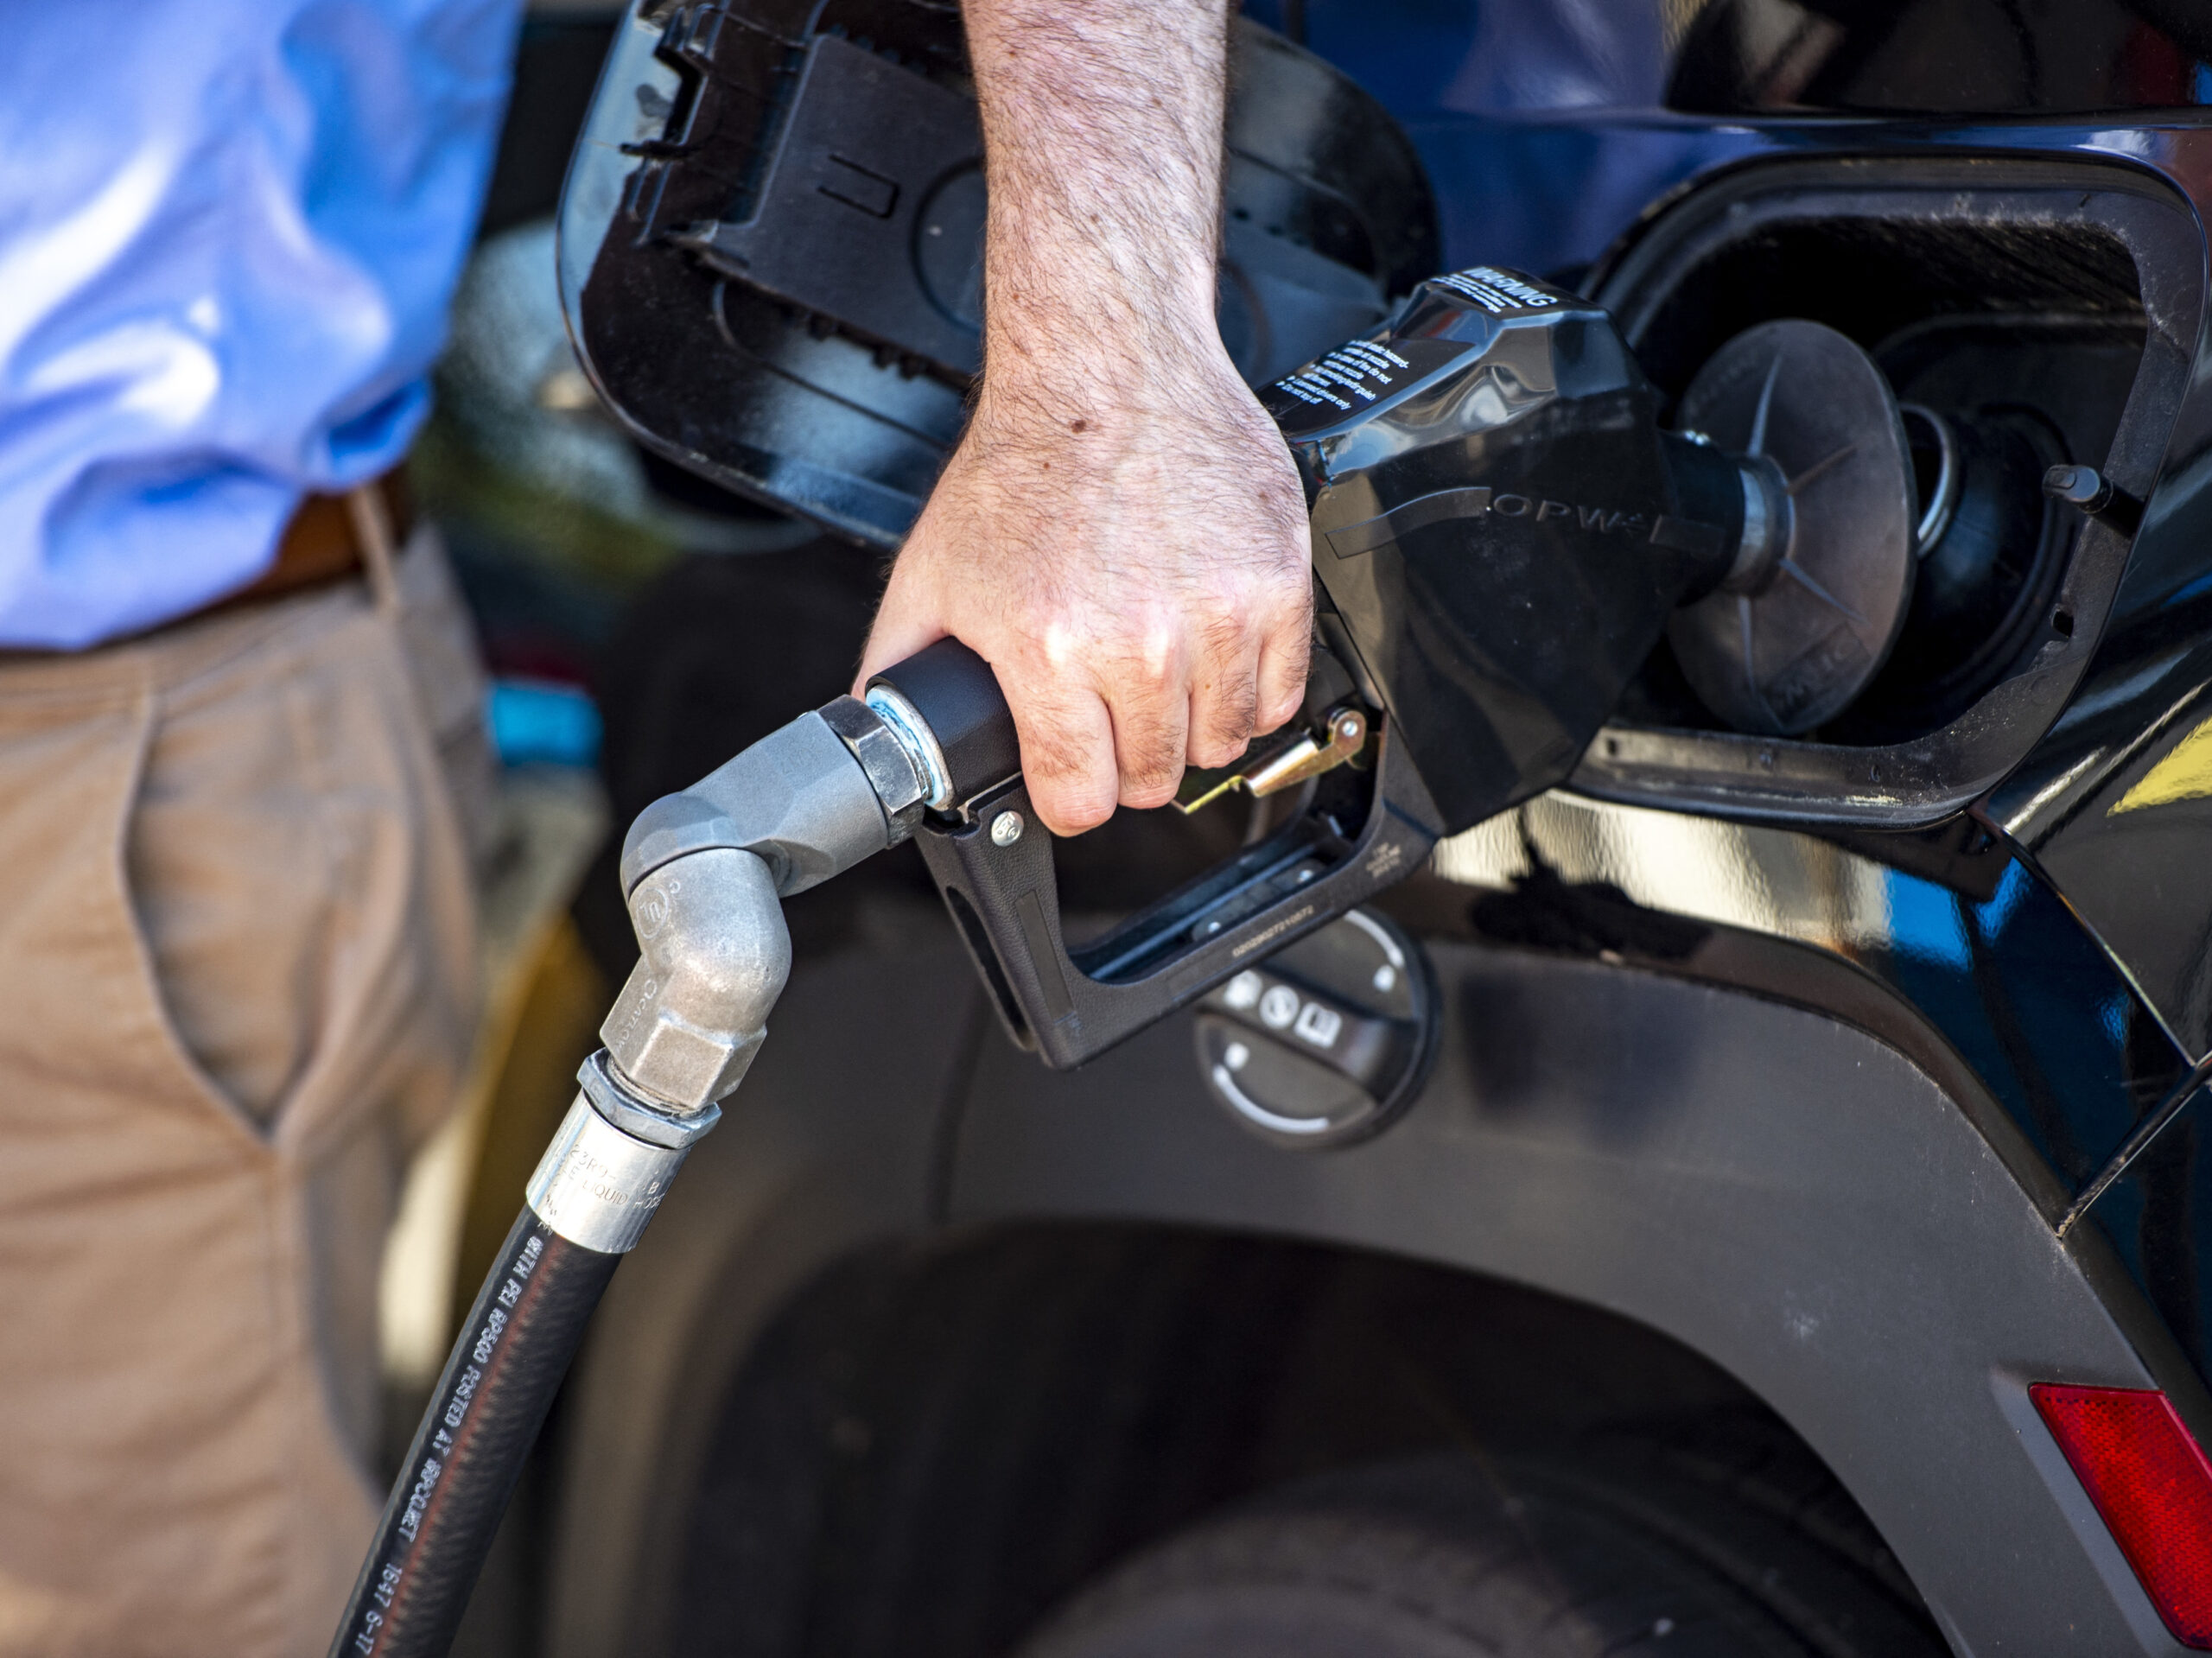 a close up photo of a person's hand filling up a gas tank